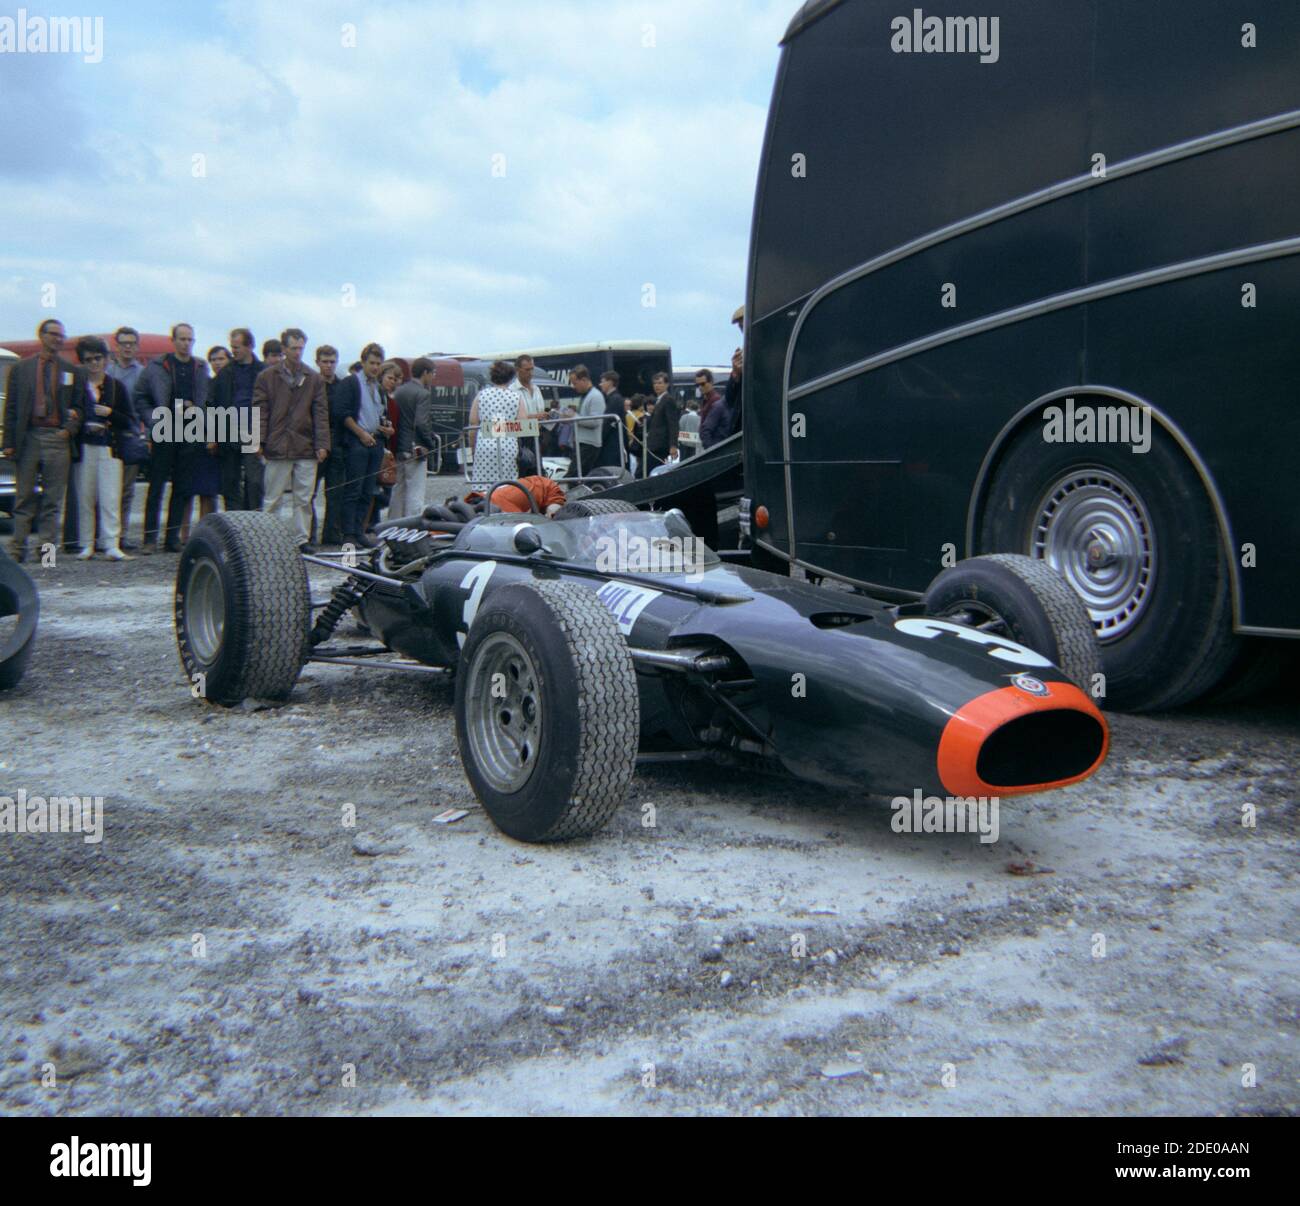 Graham Hill's BRM P261 F1 car in the paddock at Brands Hatch Practice for the 1966 British Grand Prix, 15th July. Hill finished 3rd in next day's race Stock Photo